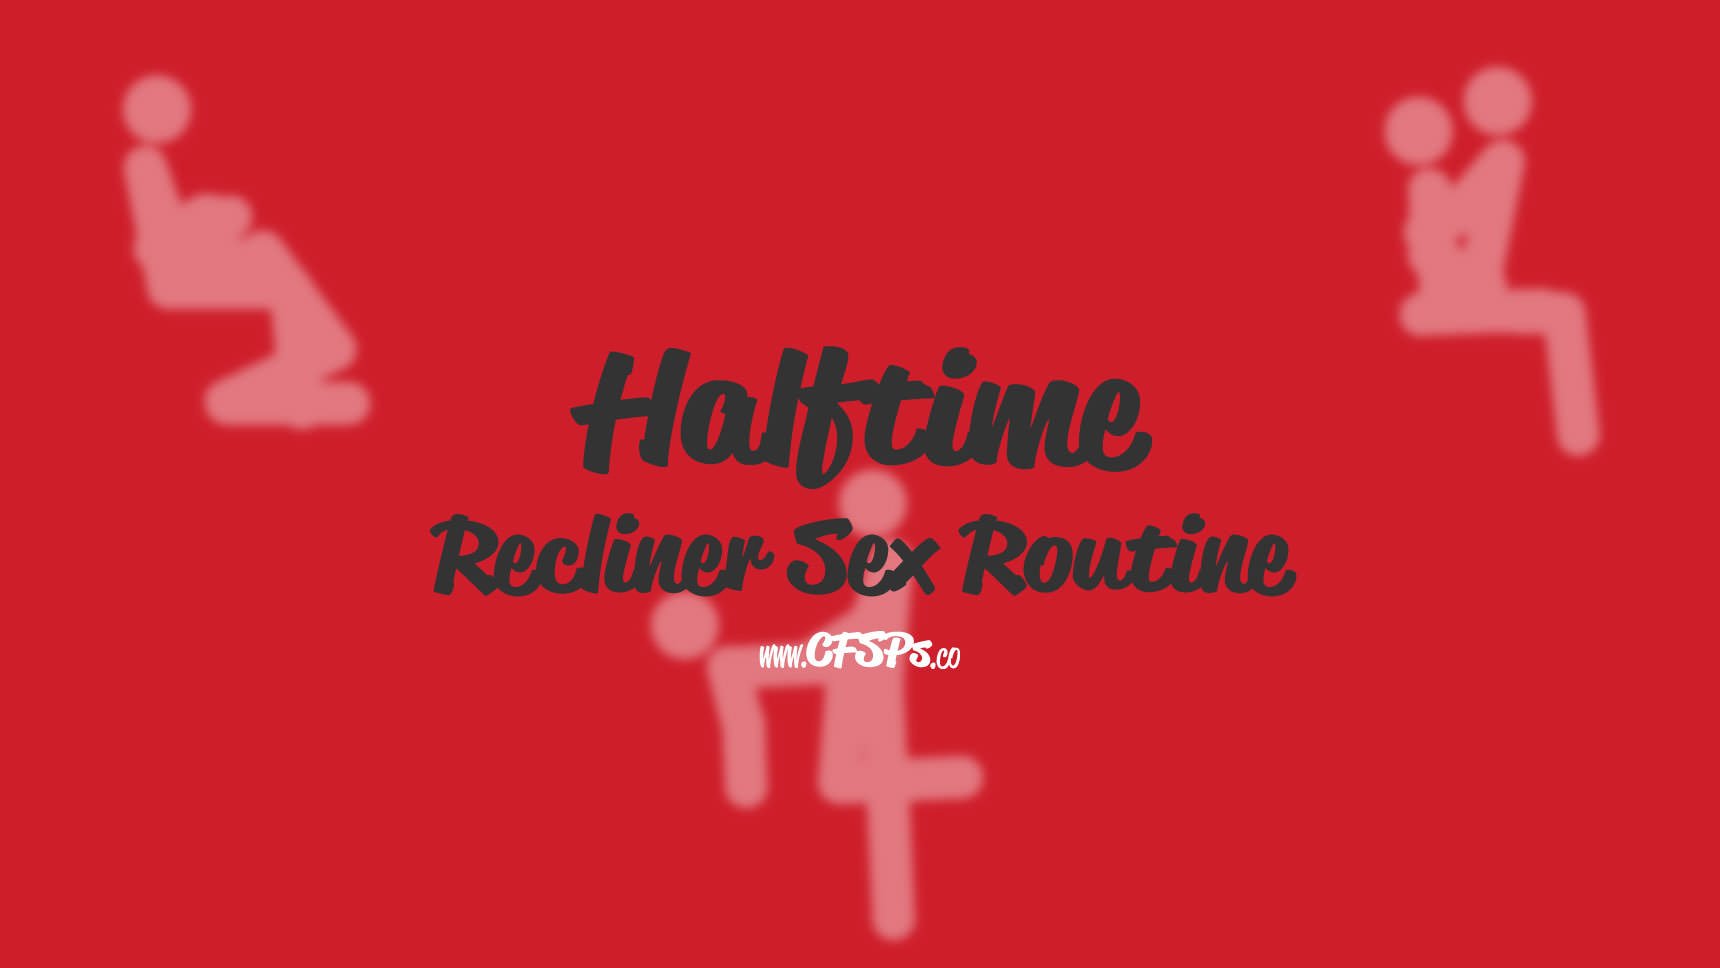 Halftime Recliner Fucking Routine